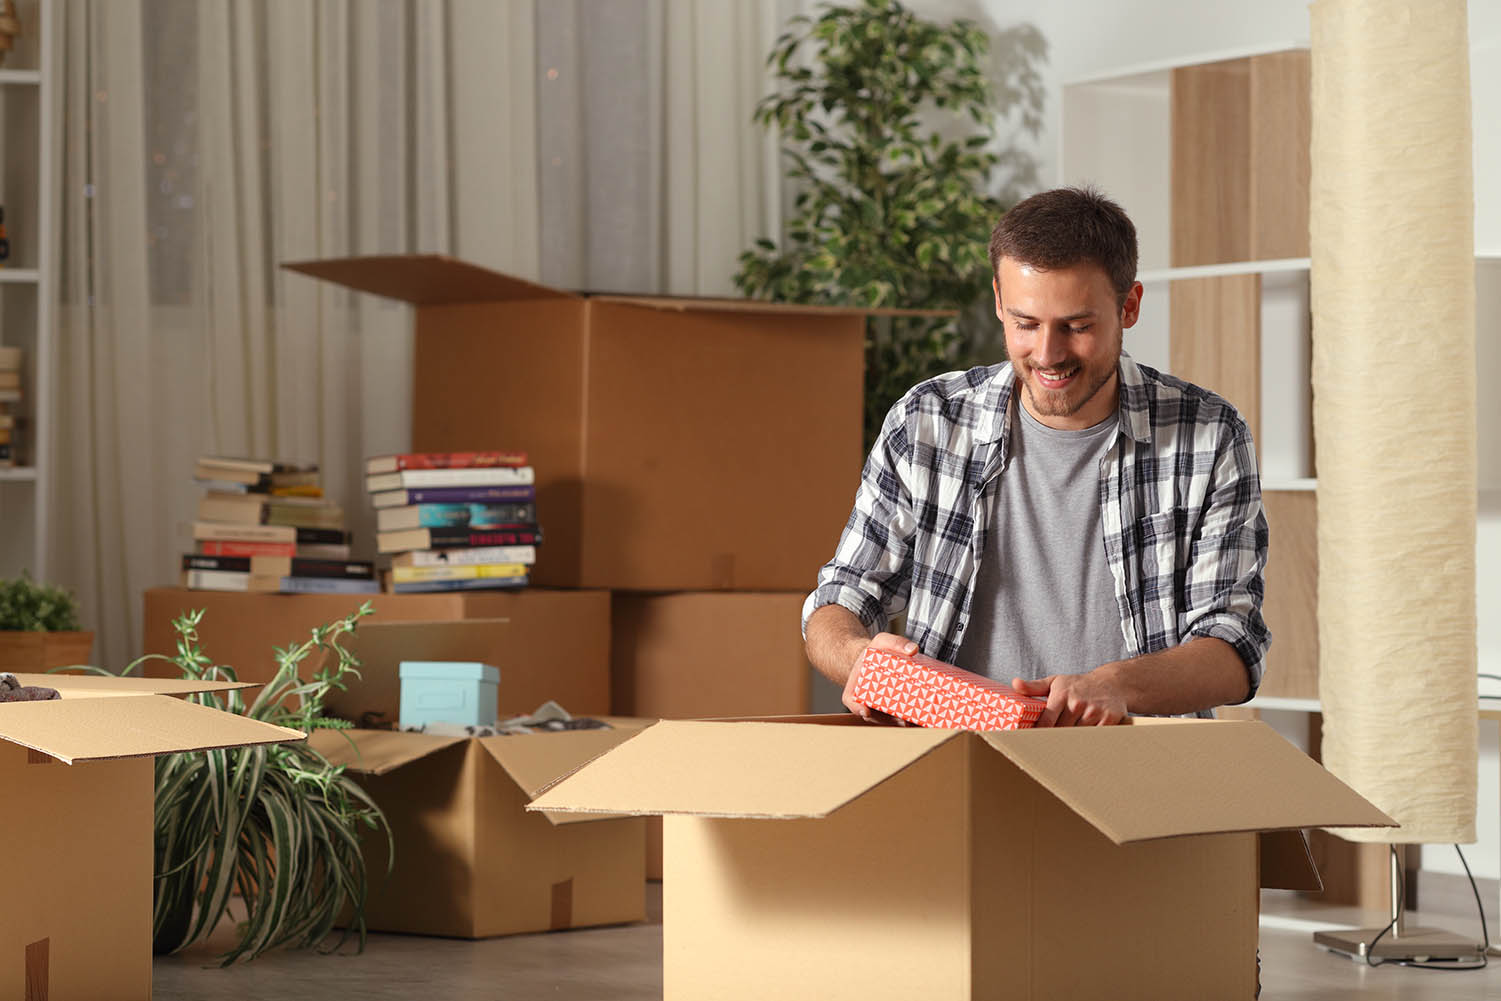 What is the first thing to do when moving to a new place?